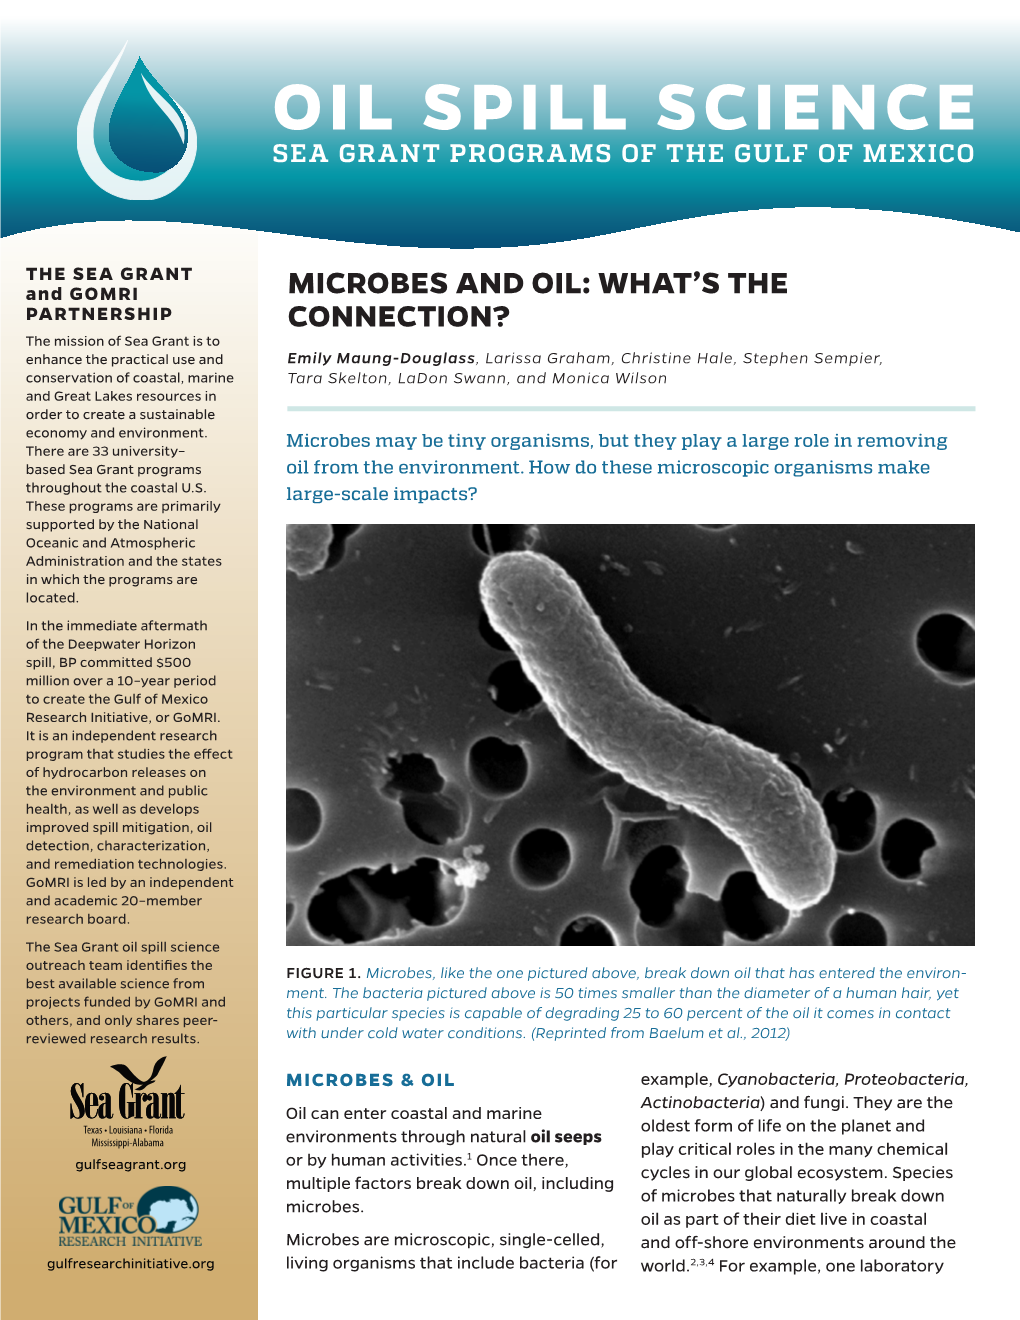 Microbes and Oil: What's the Connection?